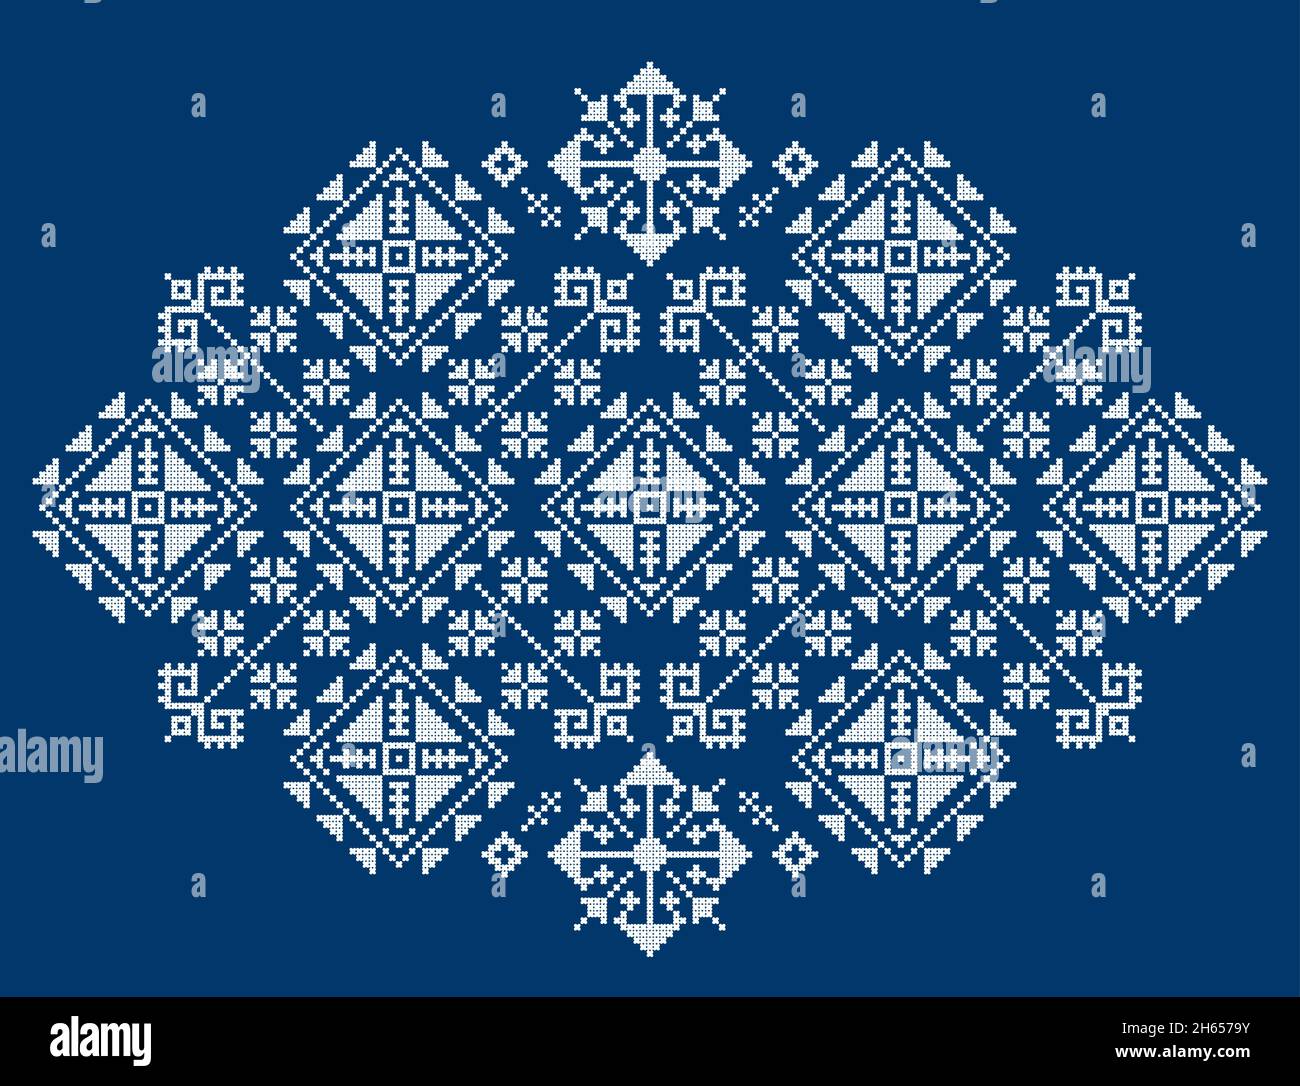 Balkan folk art vector pattern styled as traditional Zmijanje embroidery design from Bosnia and Herzegovina, unique ethnic ornament in white on navy b Stock Vector